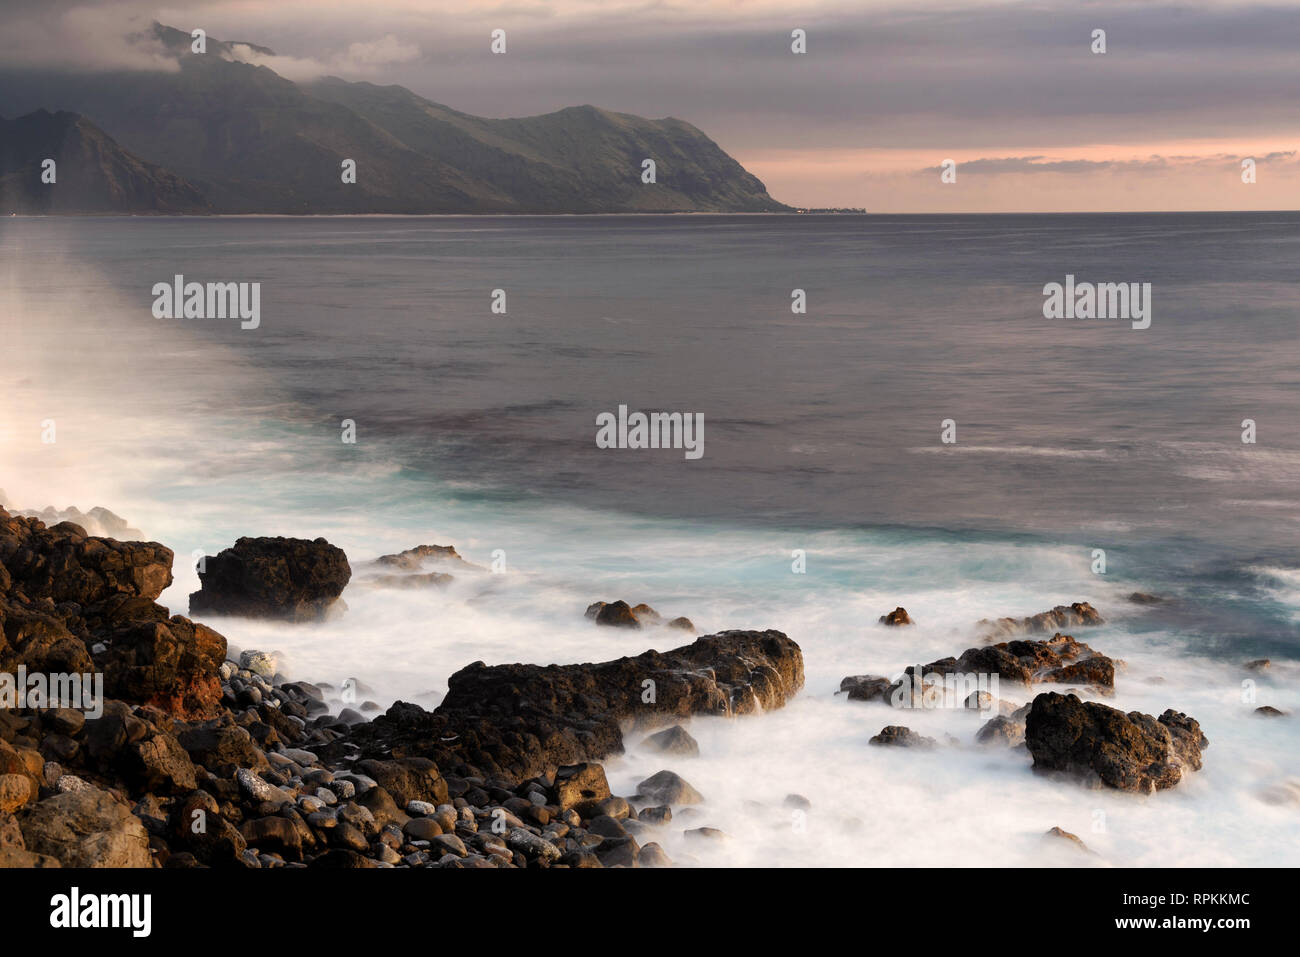 Afternoon scene nearing golden hour sunset from Kaena Point in Makaha on the island of Oahu, Hawaii. Stock Photo